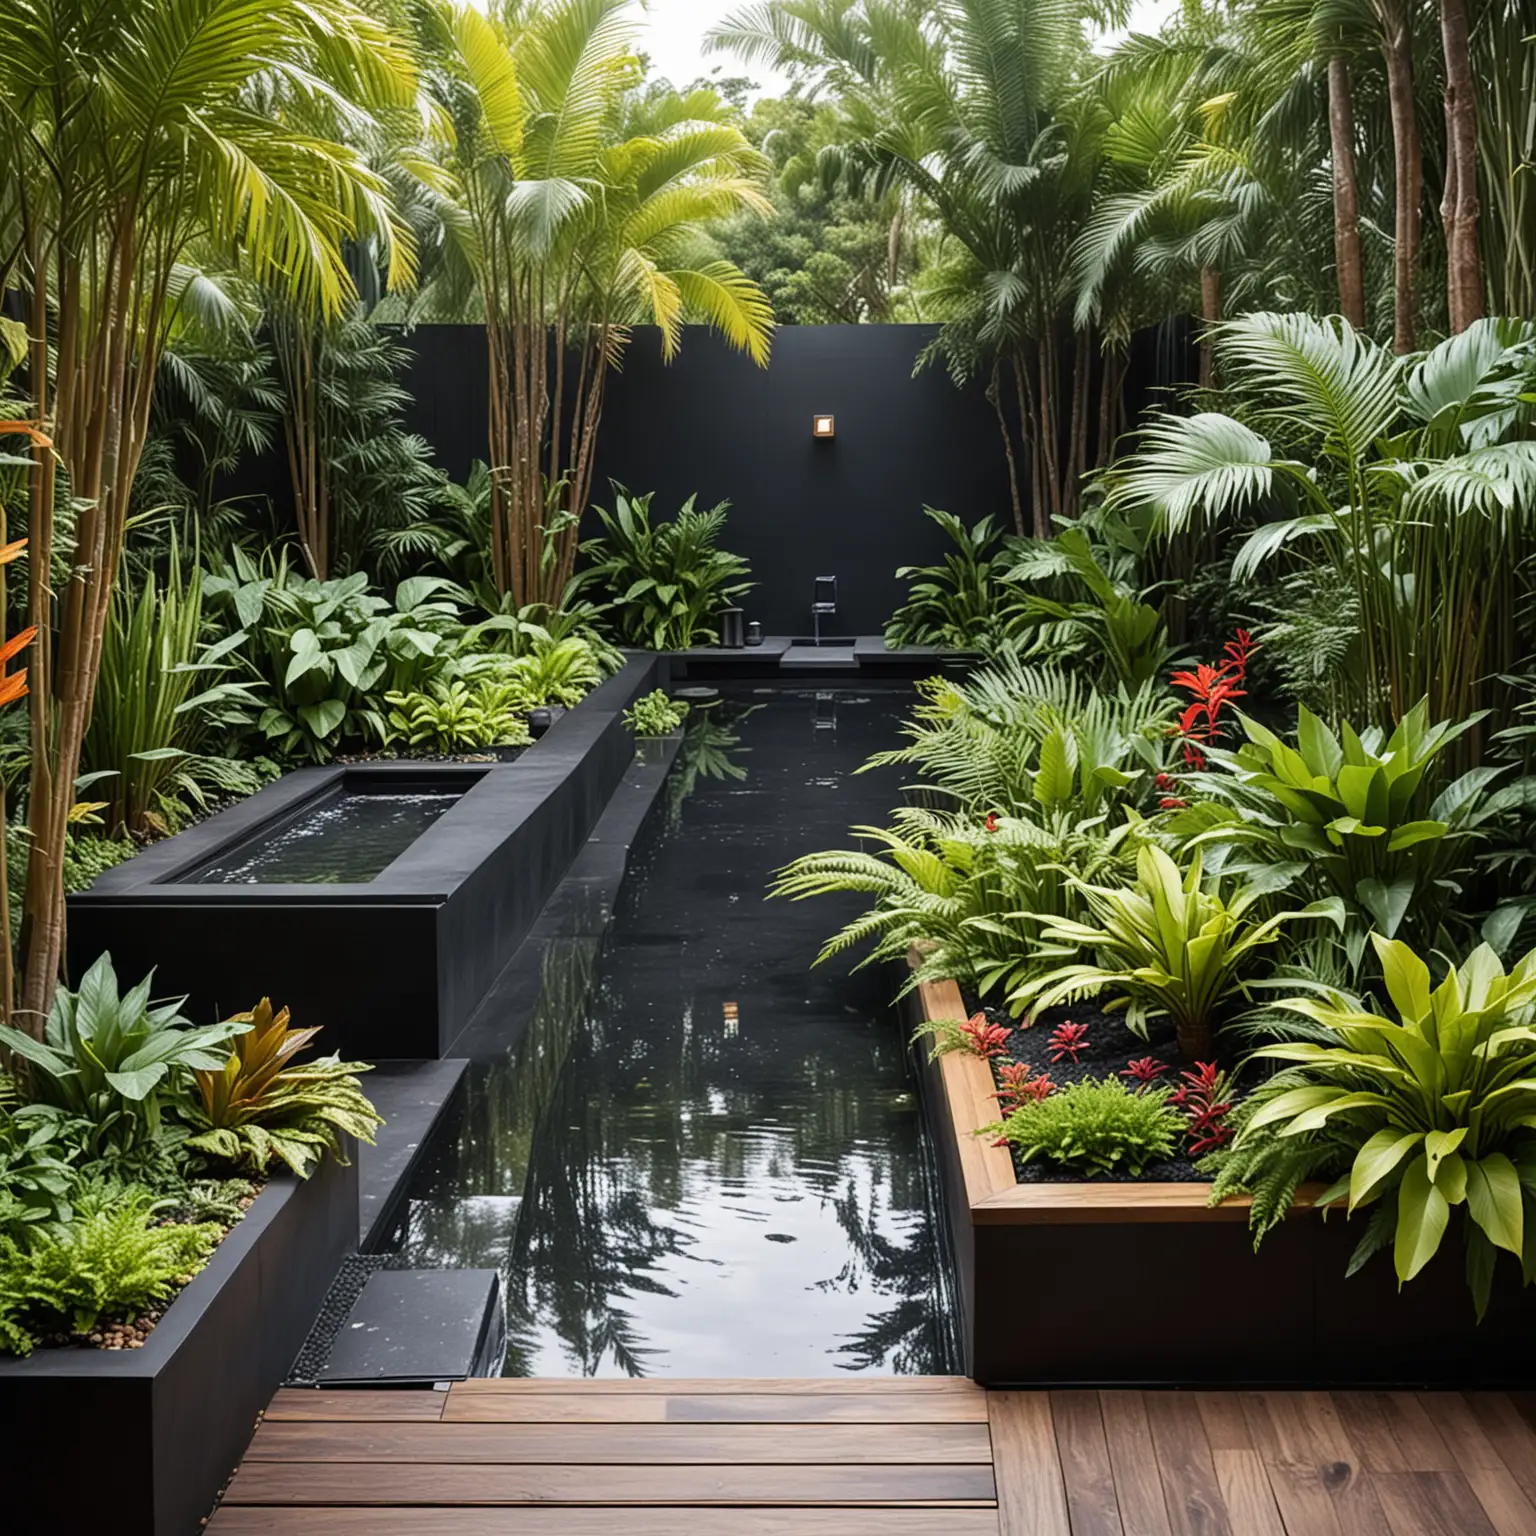 a wide shot of amodern garden with a central wooden deck surrounded by raised planters filled with tropical plants like palms, birds-of-paradise, and ferns. Include a sleek, linear water feature made of black granite and a modern metal gate at the entrance. The garden also features a container house with a rooftop terrace, providing a vantage point to enjoy the lush garden below. Set this scene on a bright, sunny afternoon, with the vibrant colors of the plants and the reflective surfaces of the water feature creating a striking visual contrast, enhanced by strategically placed lighting.
